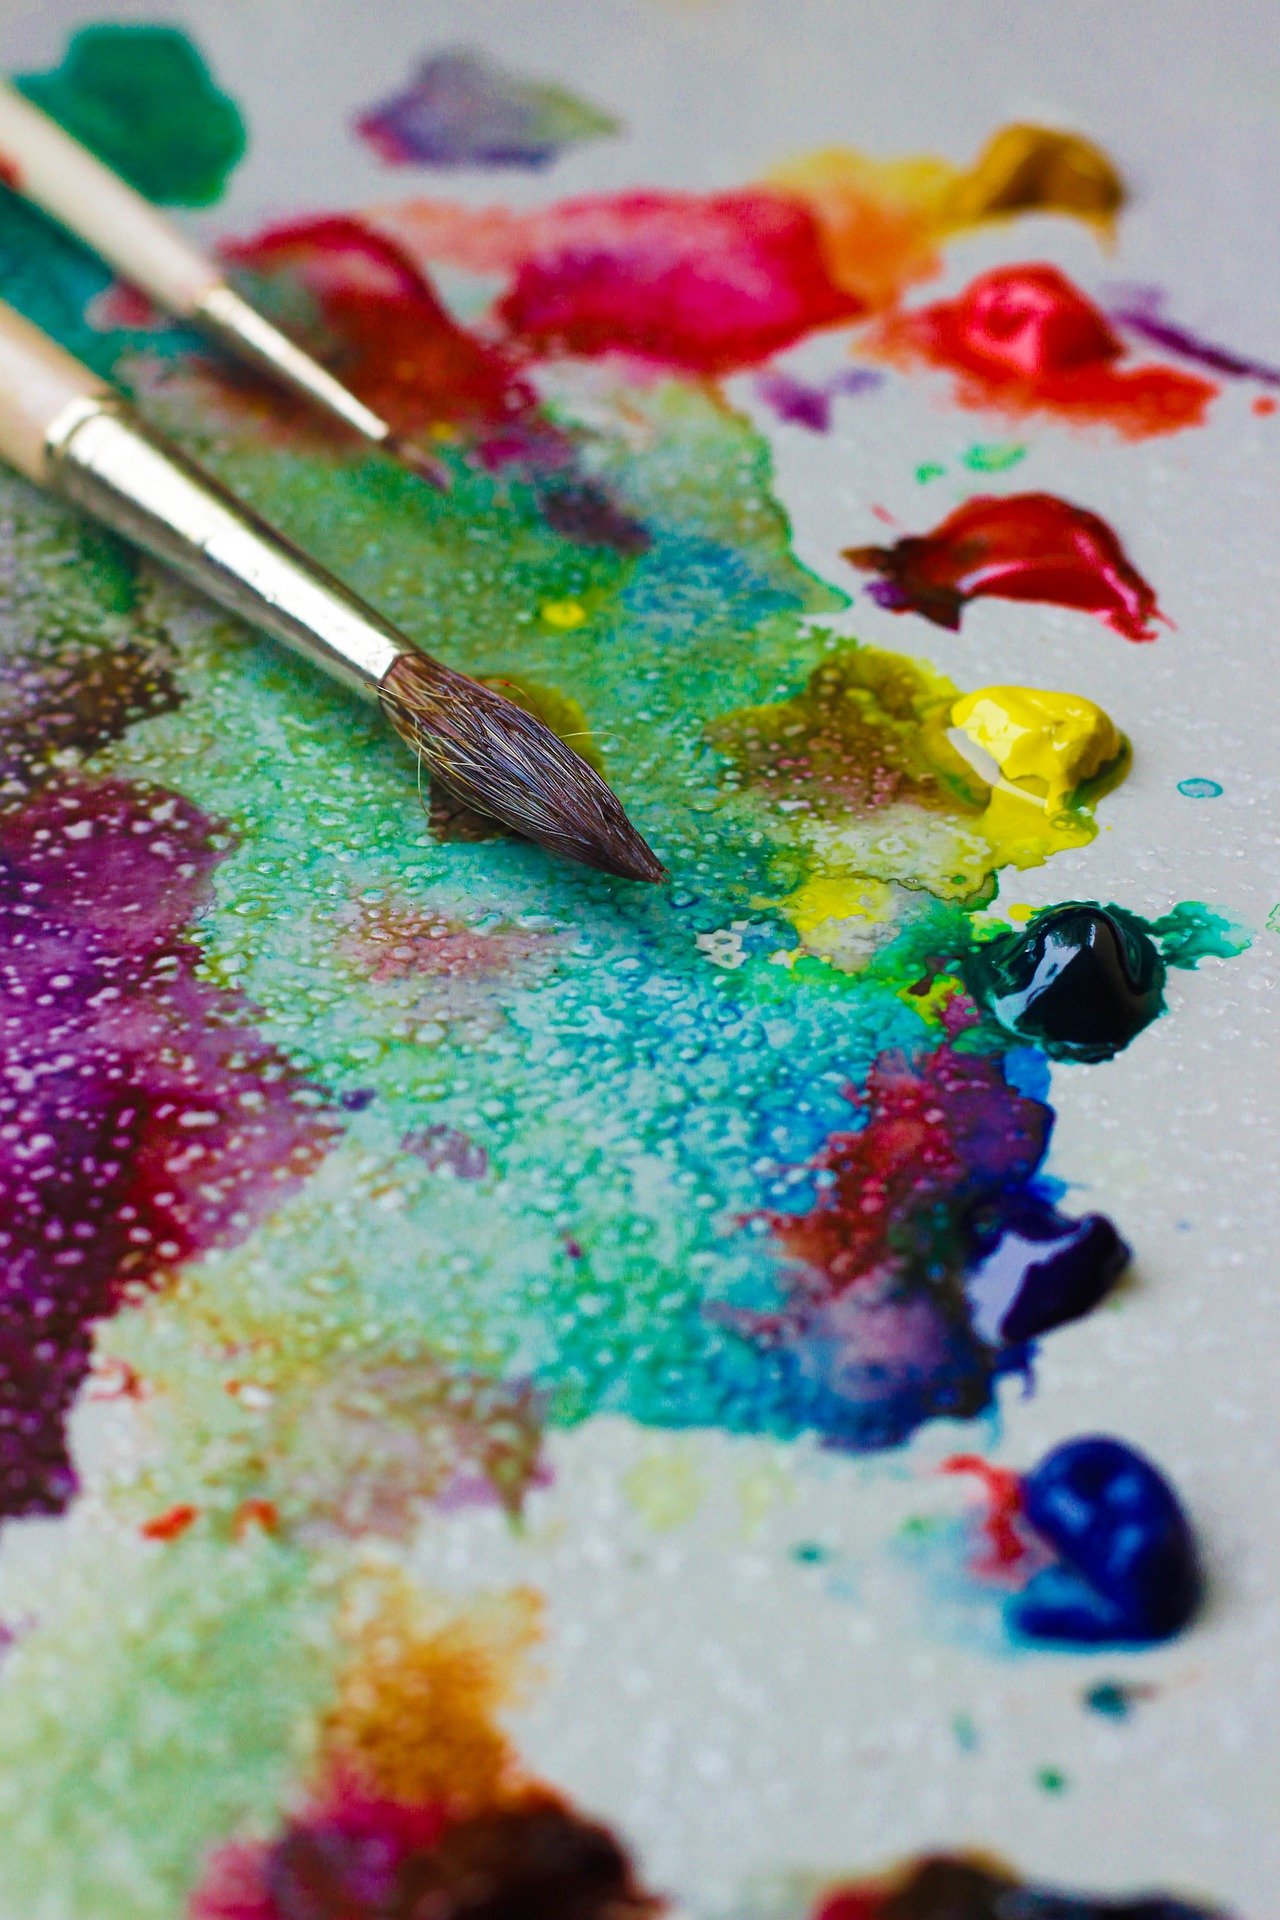 Photo of paintbrushes lying on paper that is dotted with watercolor paint.